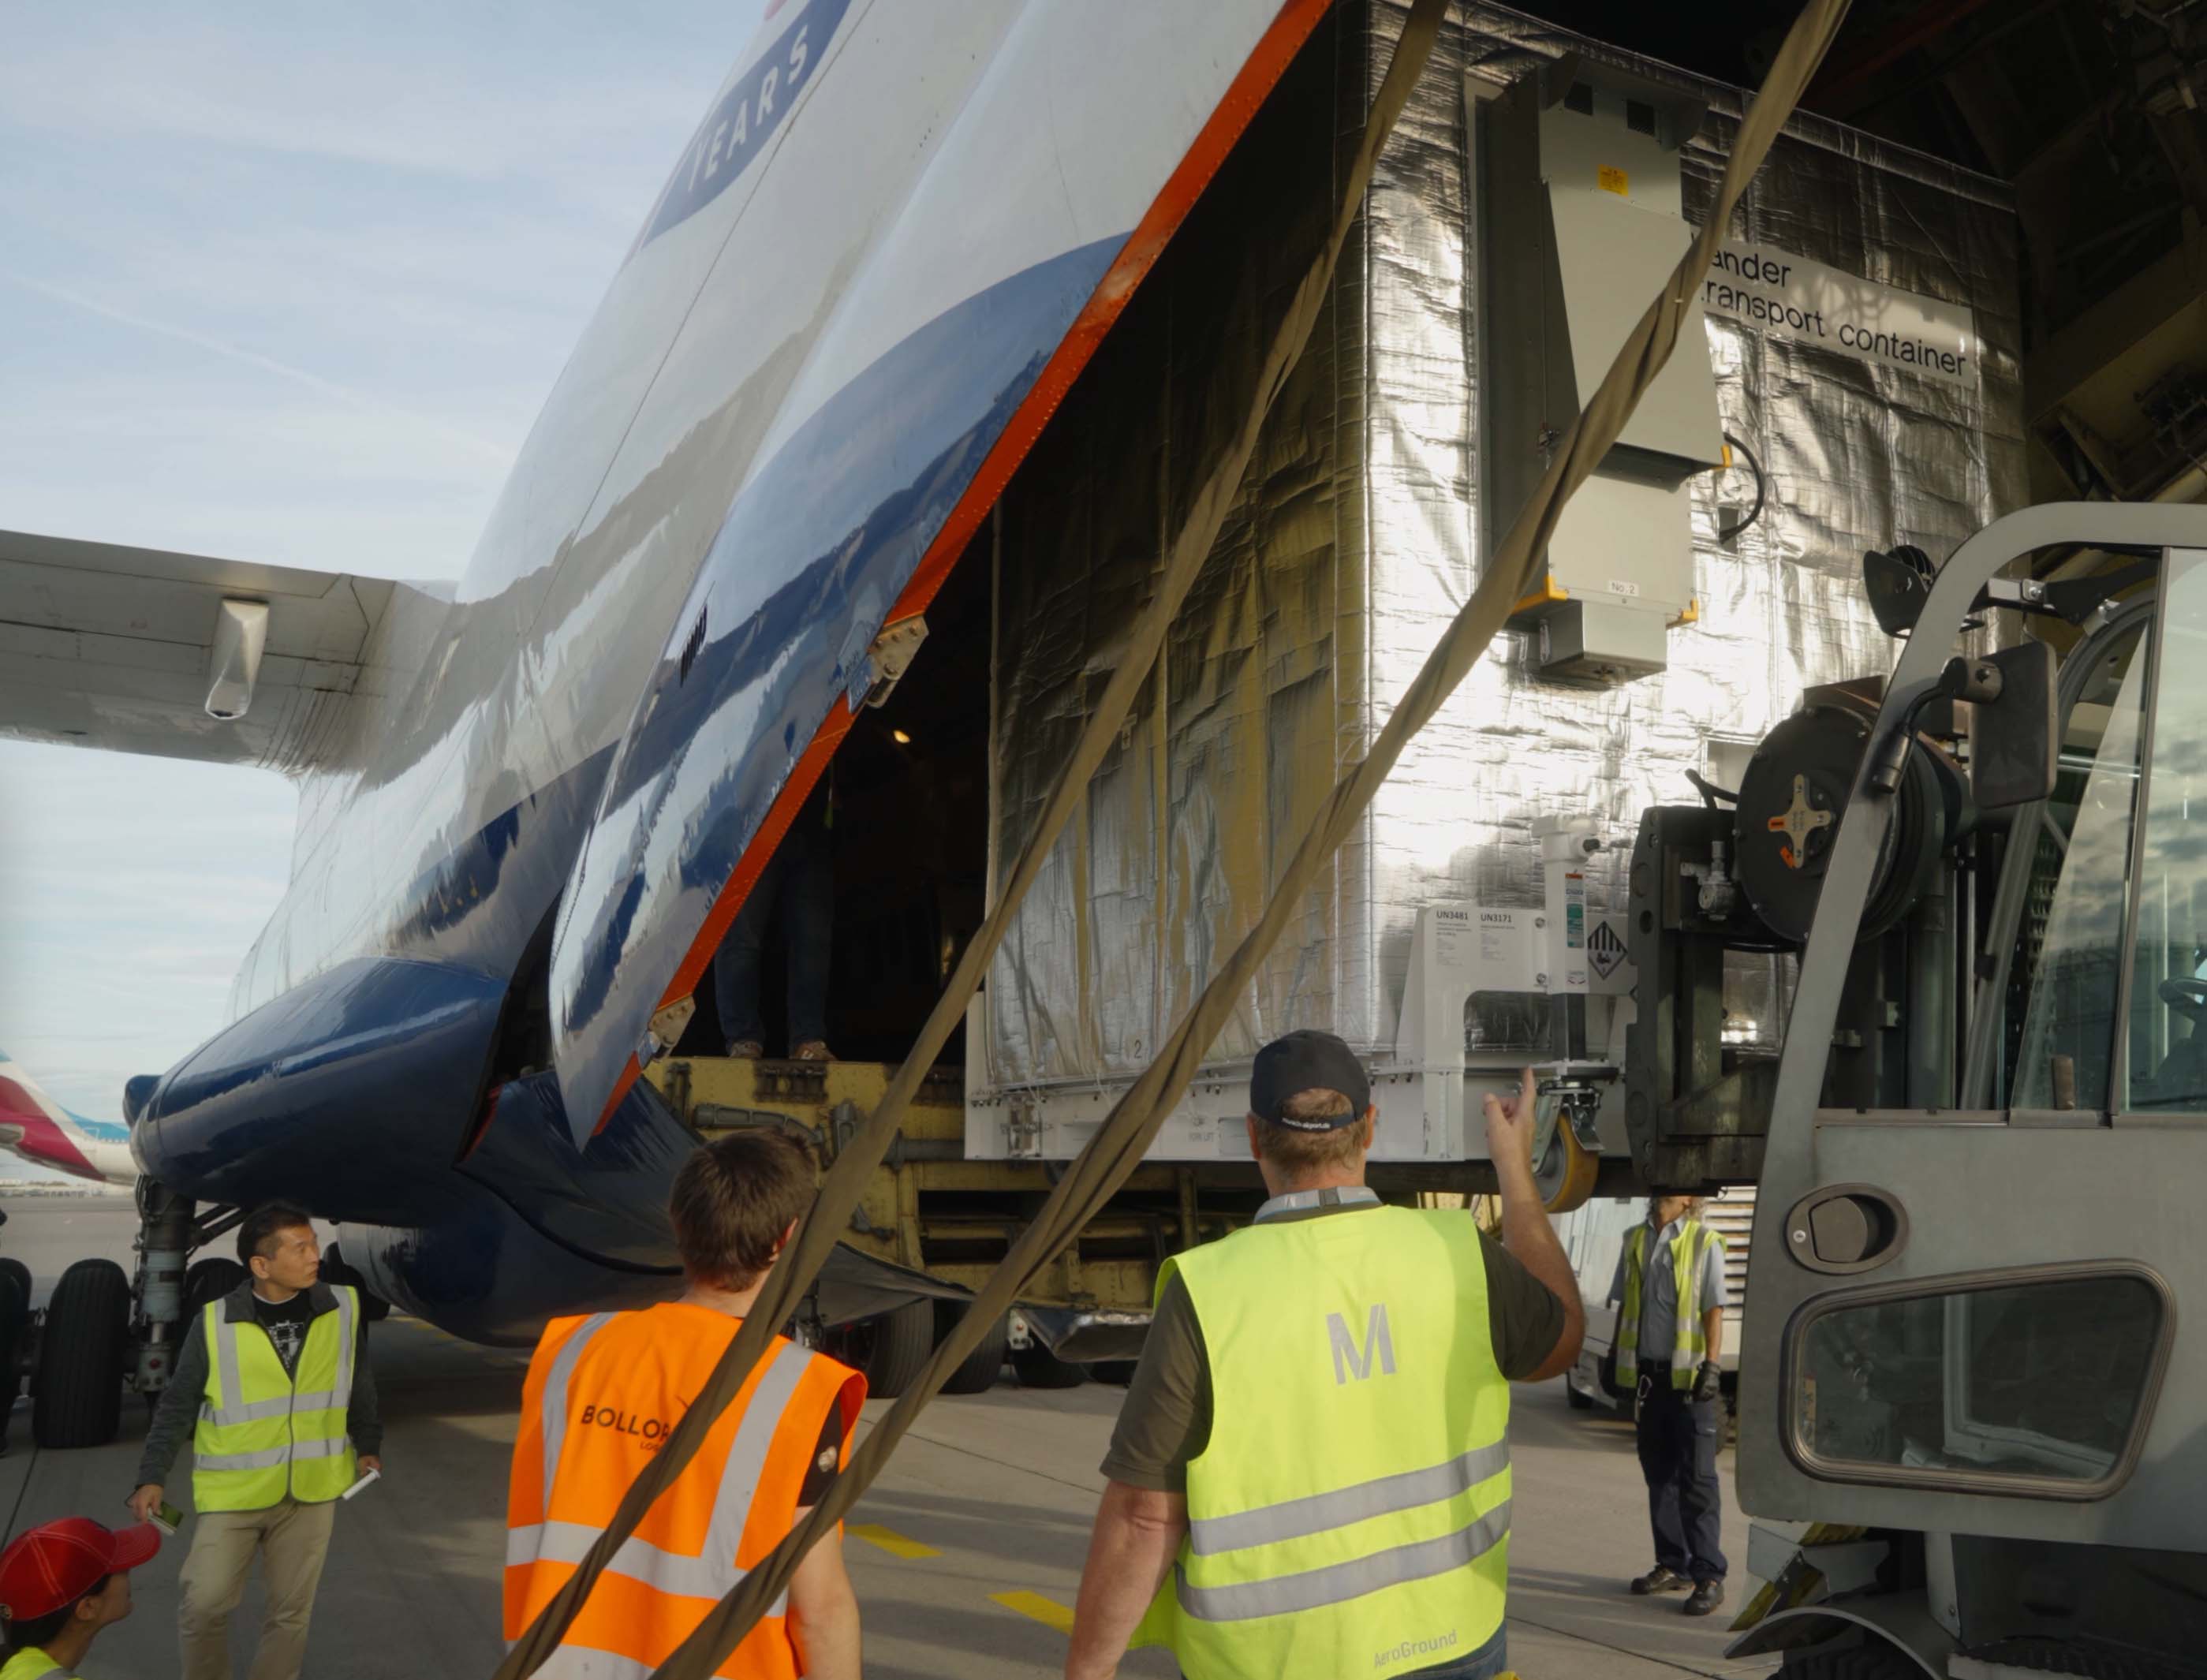 The M1 lander is loaded onto the cargo plane for transport to Cape Canaveral, Fla.